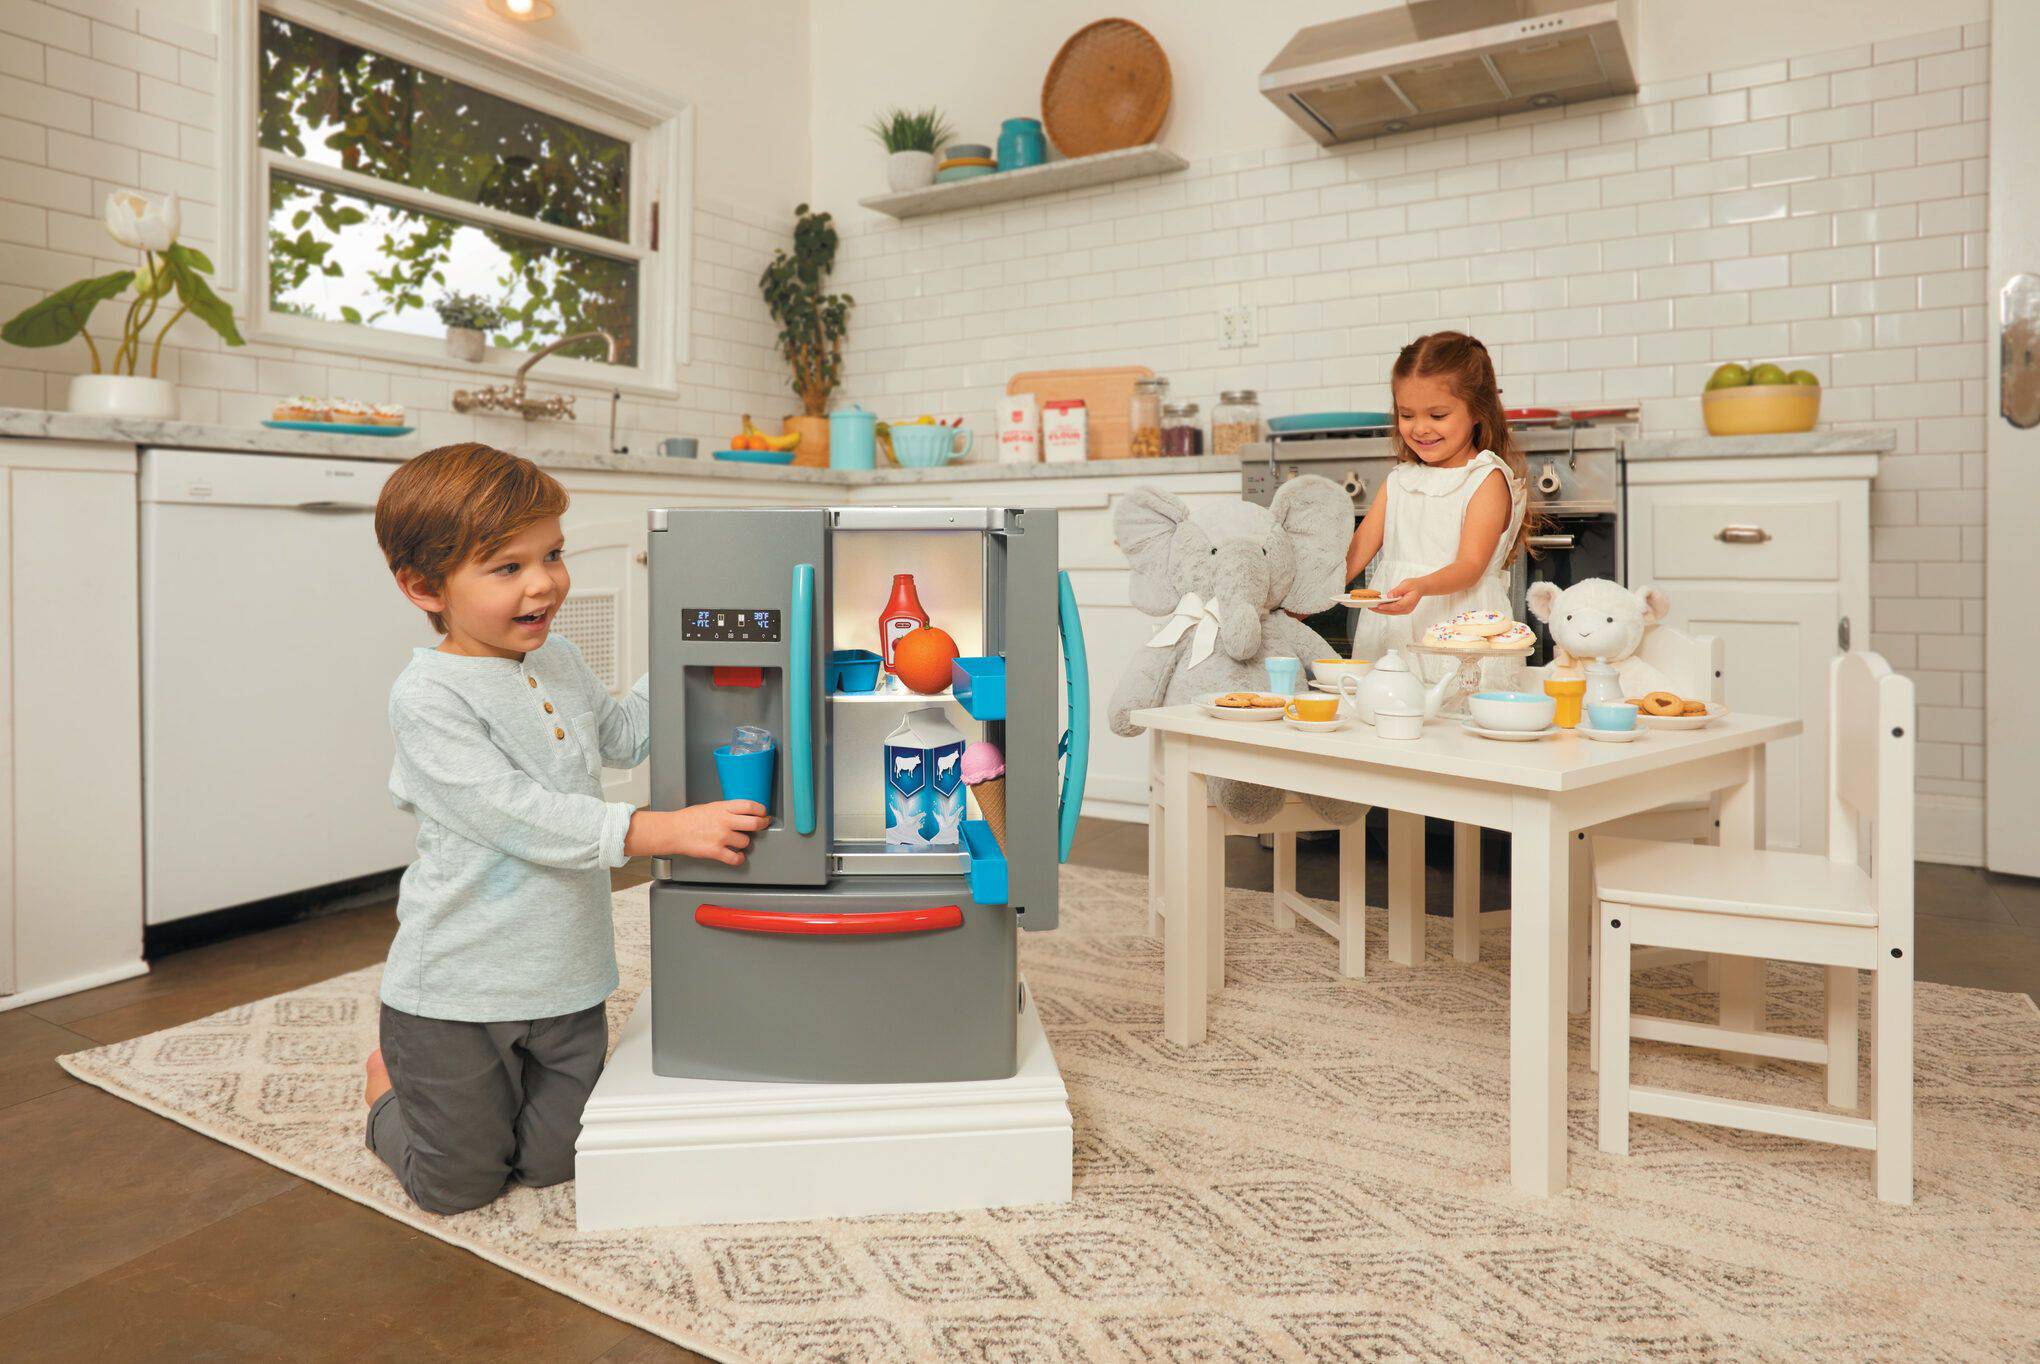 Little Tikes First Fridge - Albagame